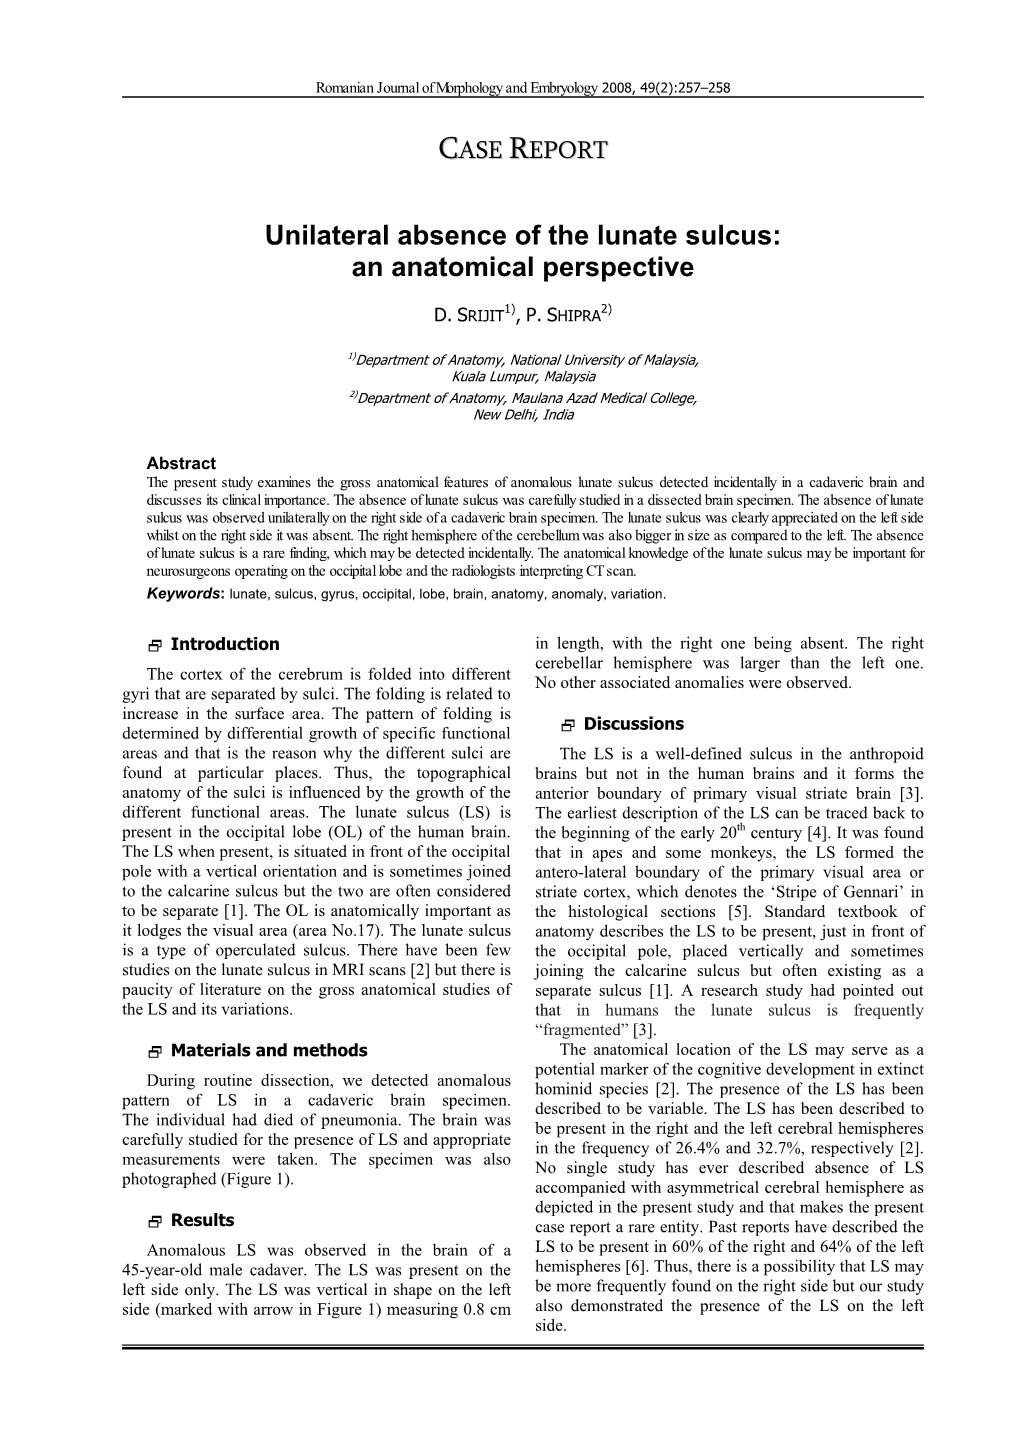 Unilateral Absence of the Lunate Sulcus: an Anatomical Perspective